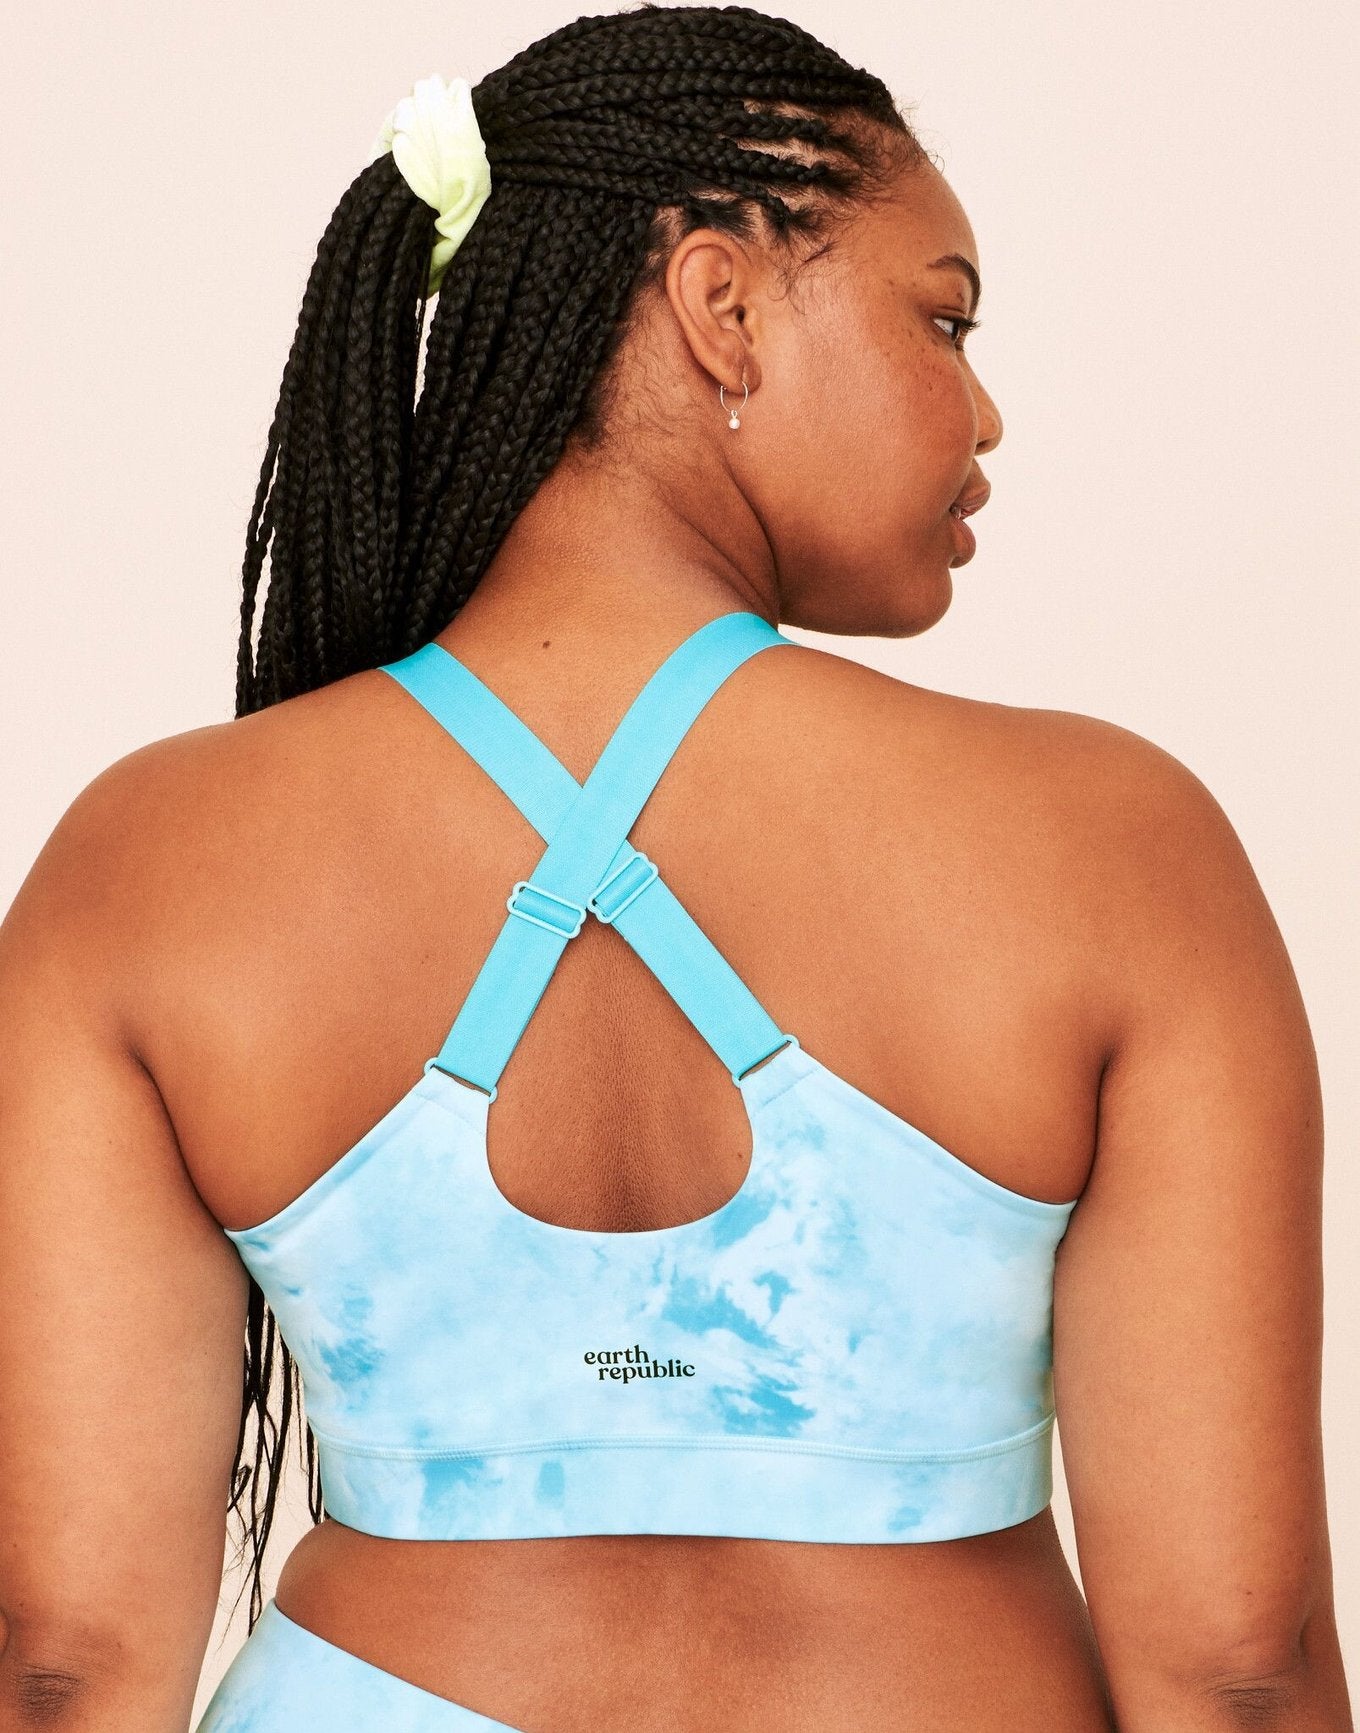 Earth Republic Evie Mid-Support Sports Bra Sports Bra in color Wash (Sports Print 3) and shape sports bra